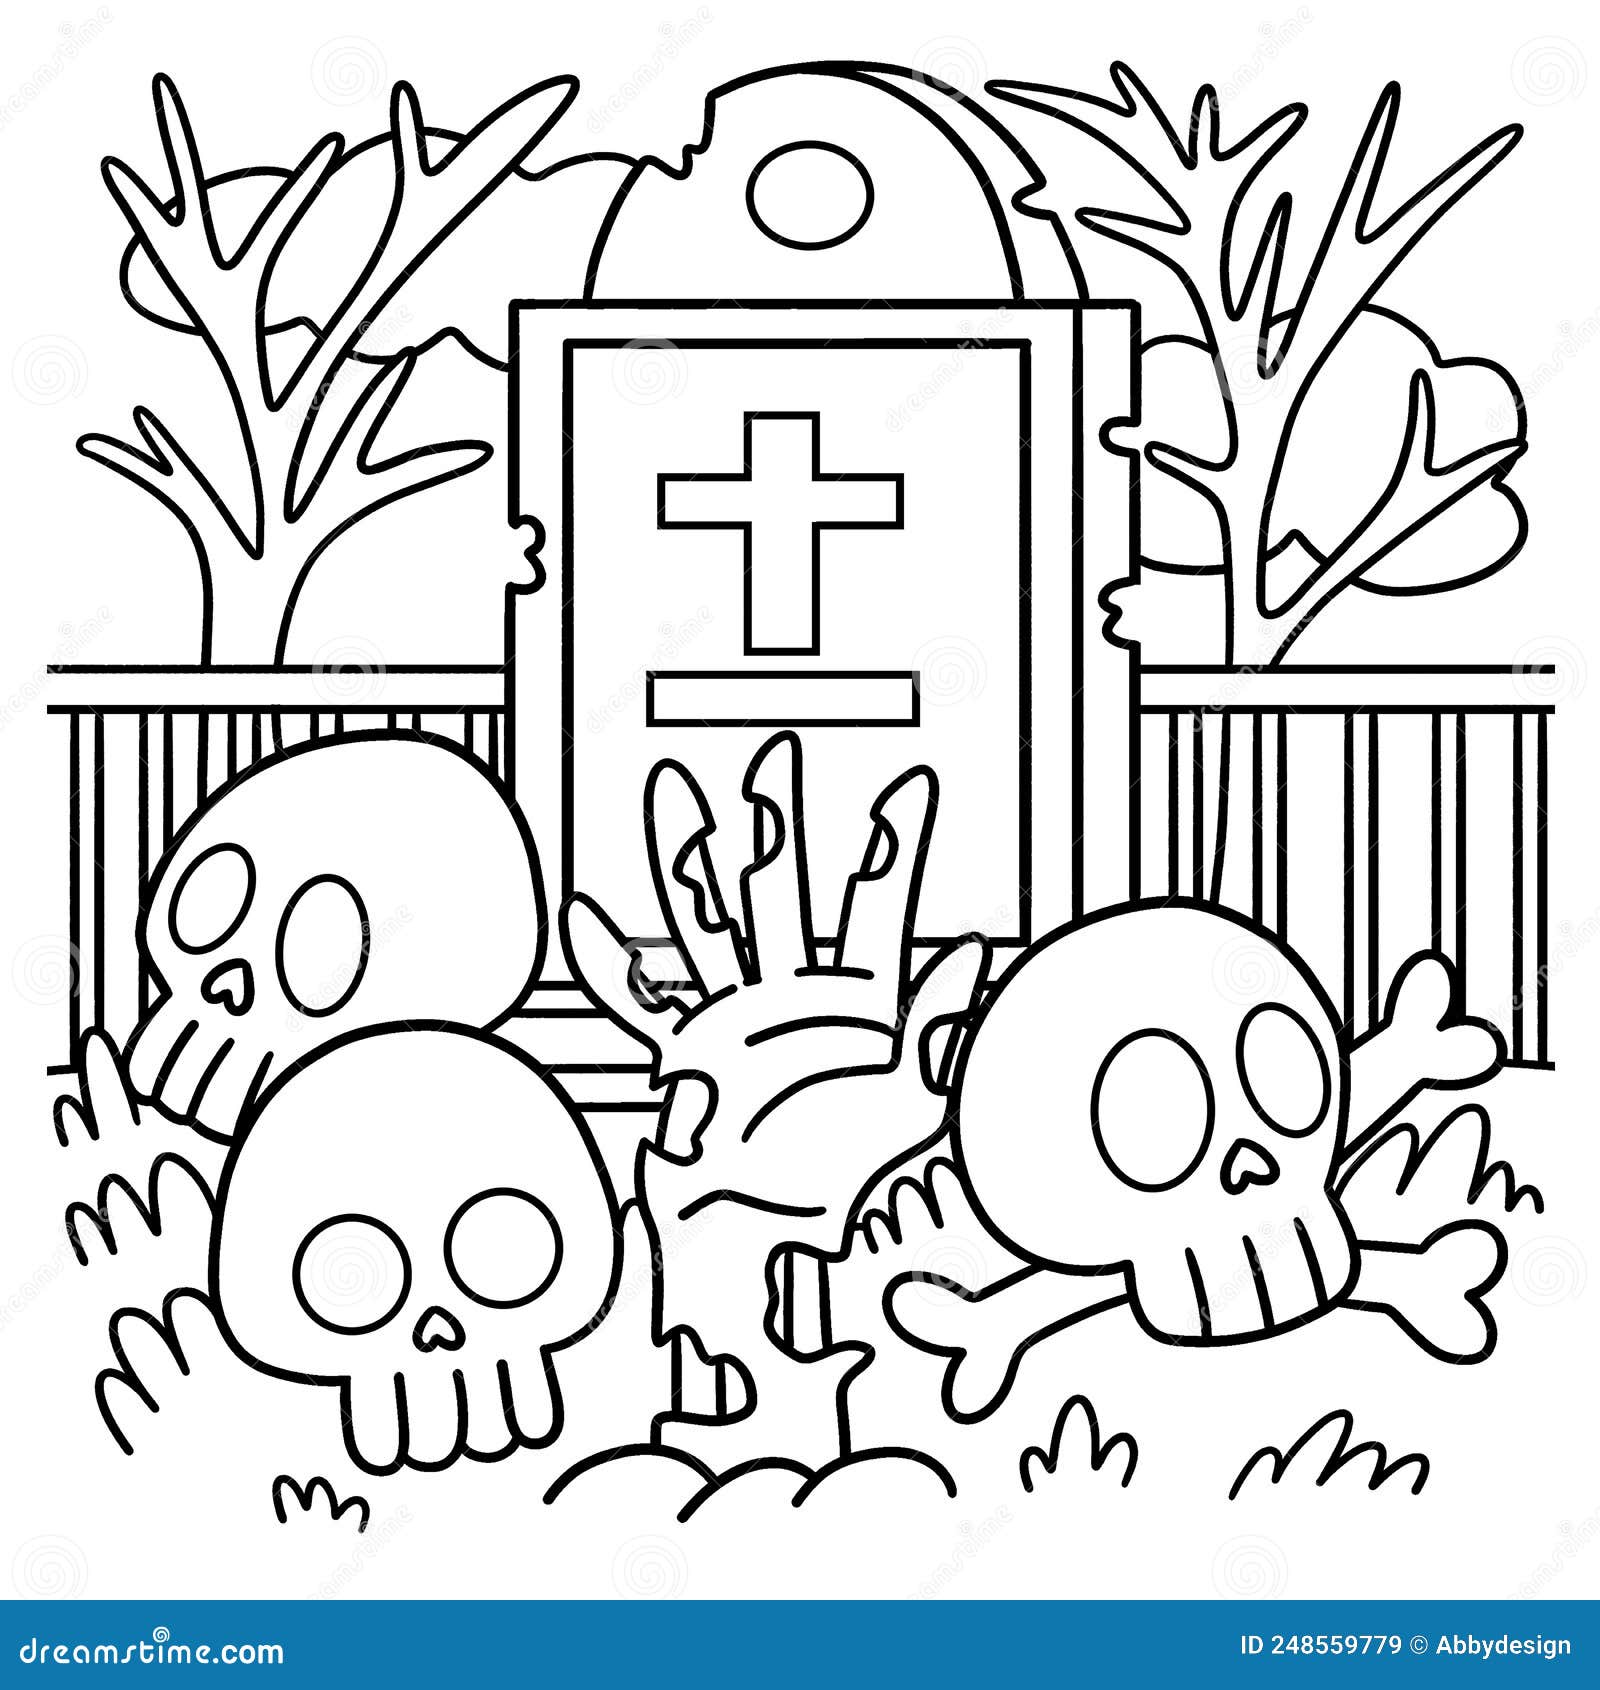 Skull Halloween Coloring Page for Kids Stock Vector - Illustration of ...